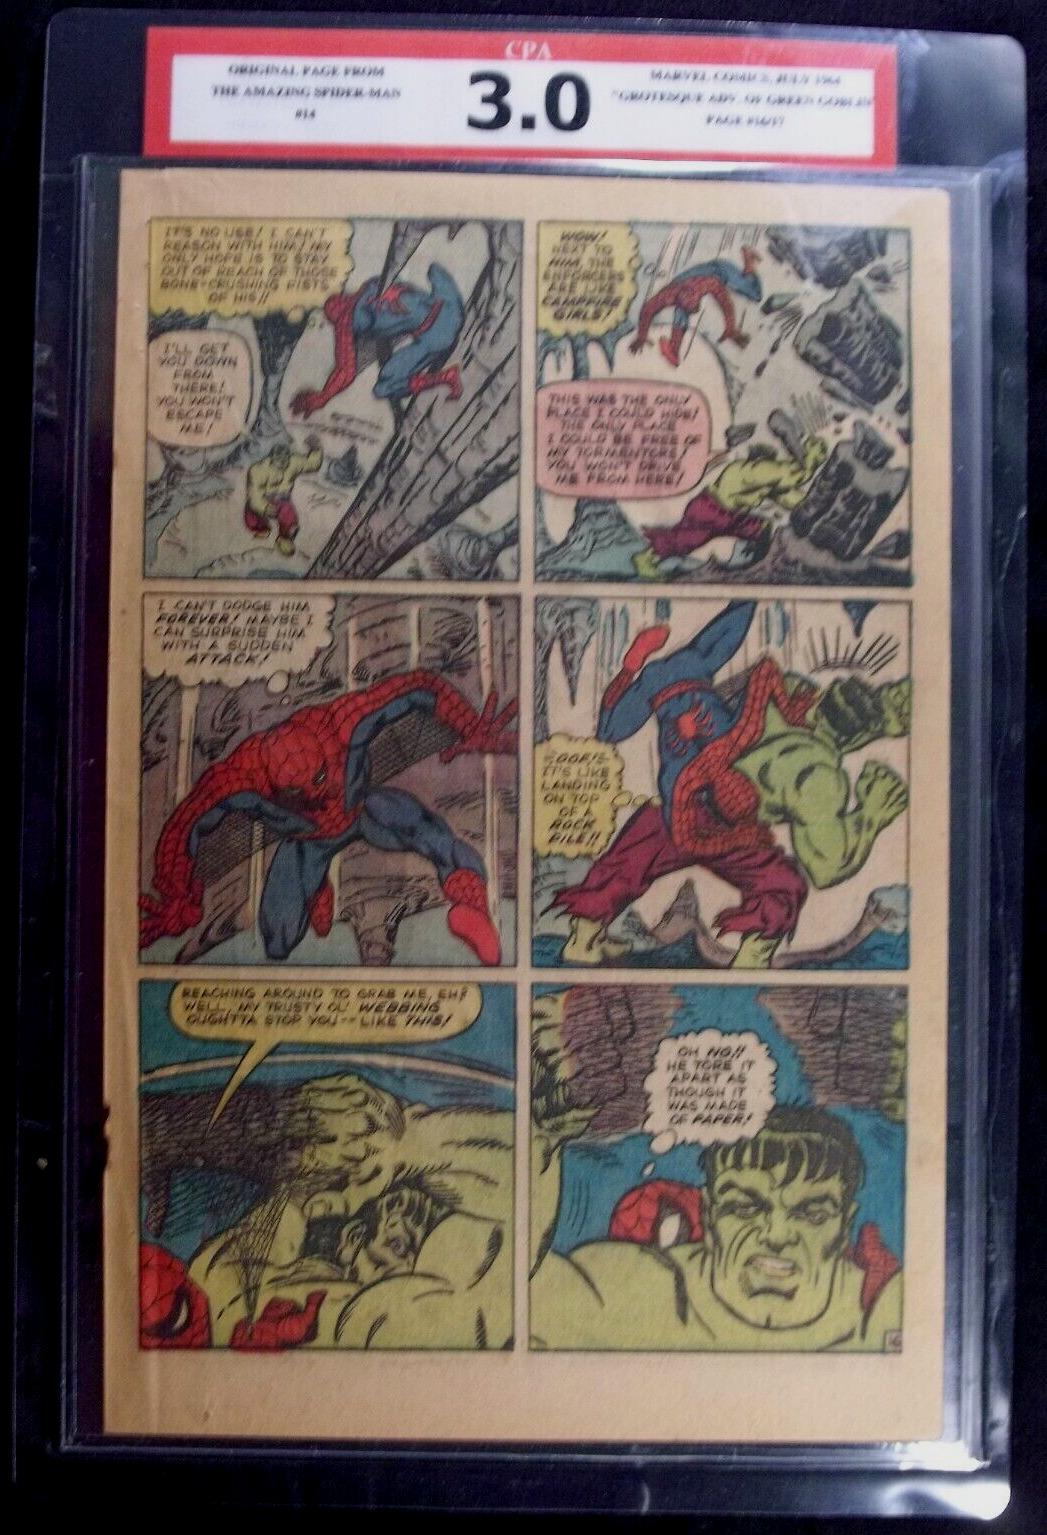 Amazing Spider-man #14 CPA 3.0 SINGLE PAGE #16/17 1st app. The Green Goblin